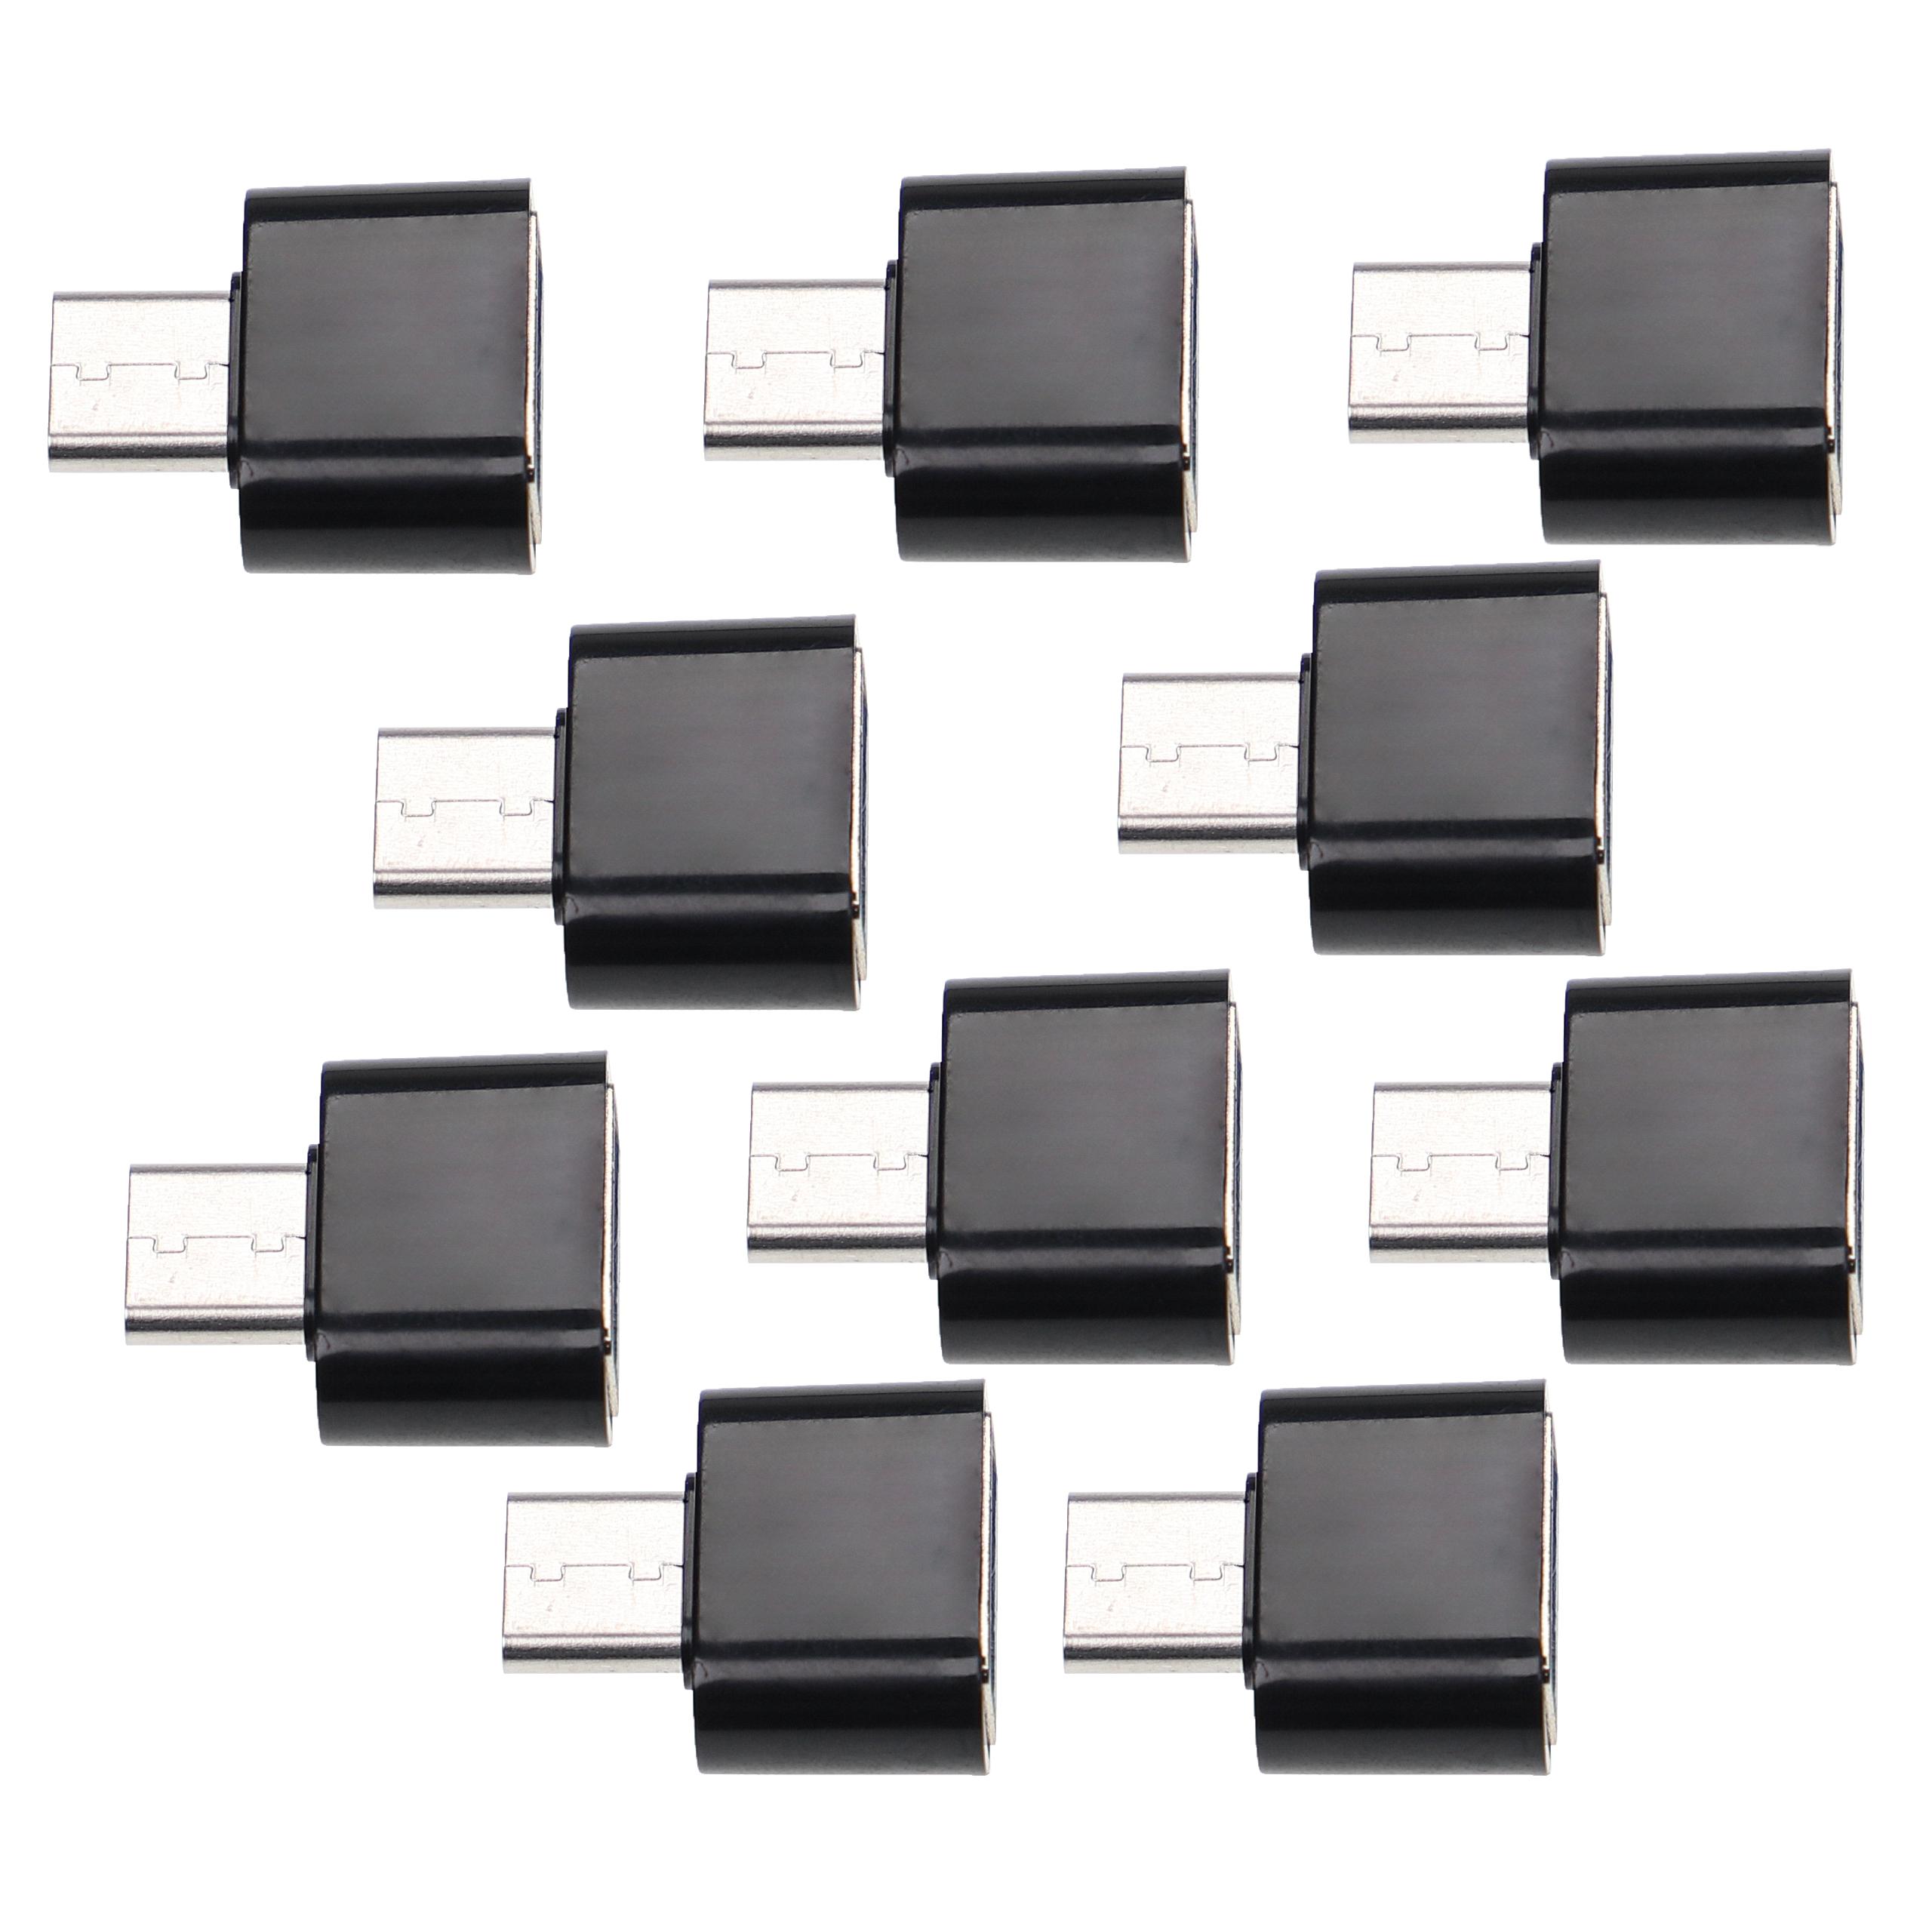 10x Adapter USB Type C (m) to USB 3.0 (f) suitable for Smartphone, Tablet, Notebook - USB Adapter Black